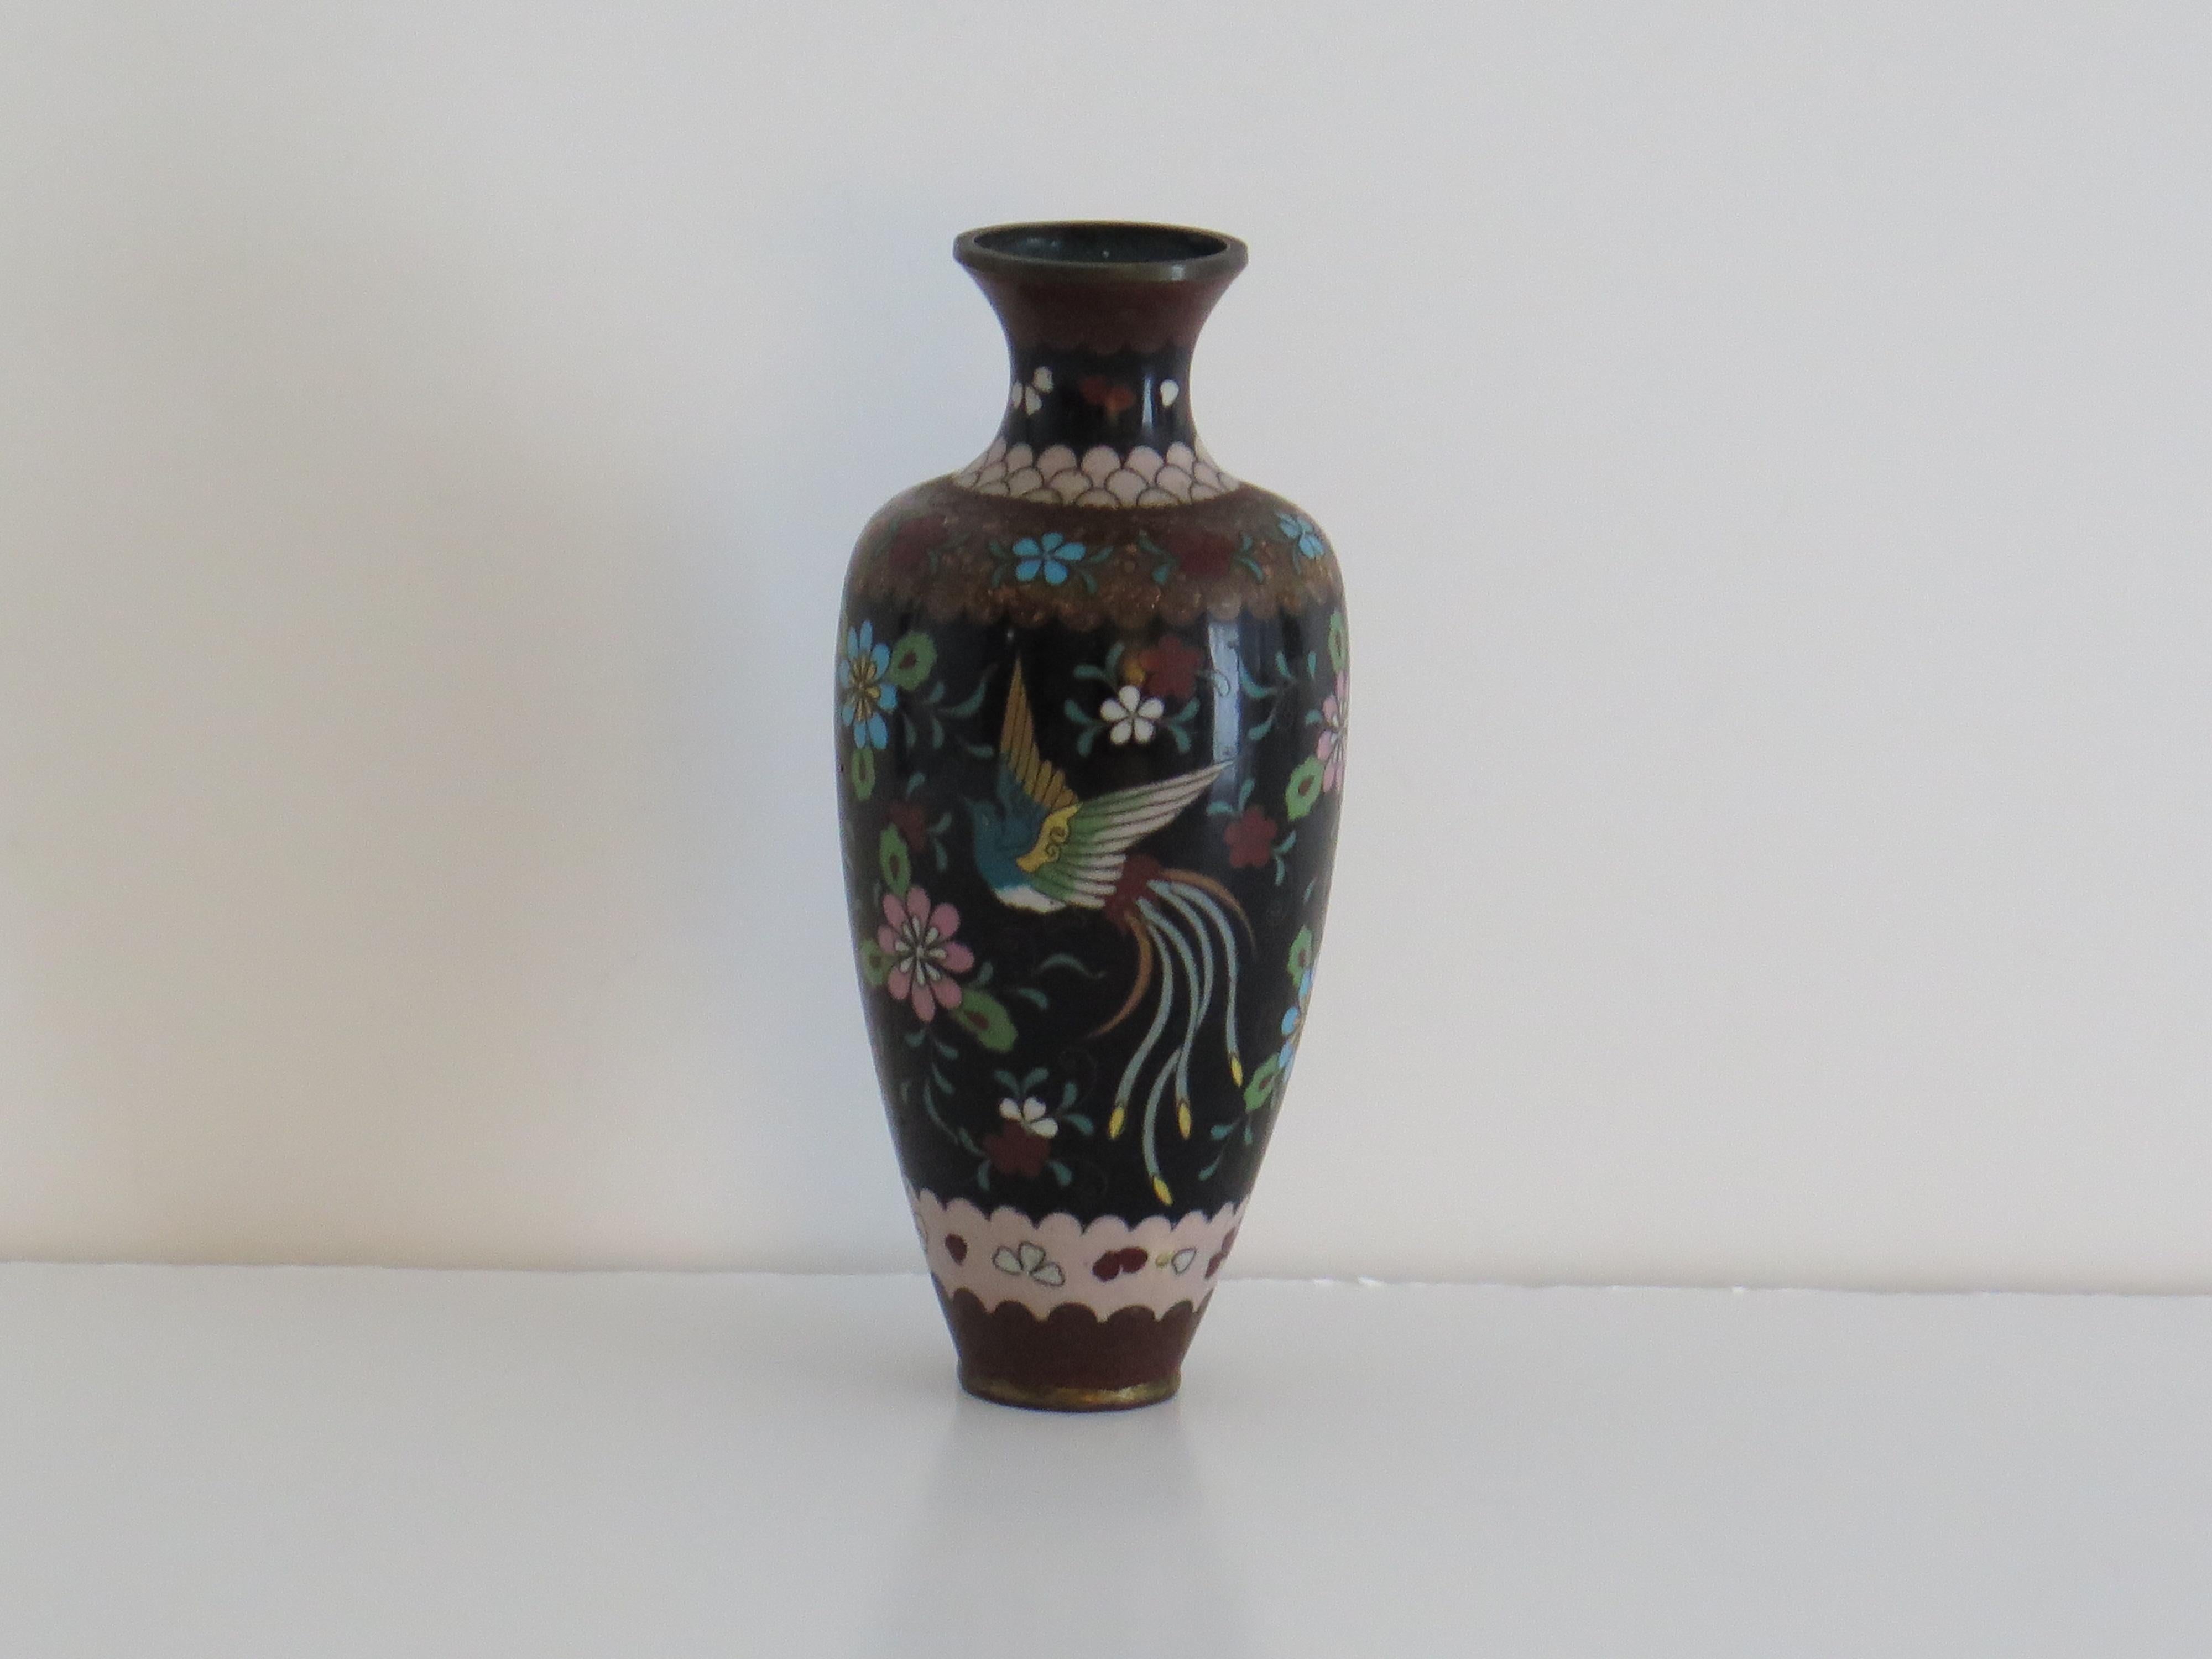 Cloissoné Chinese Cloisonné Vase on Bronze with Phoenixes,  19th Century Qing period  For Sale